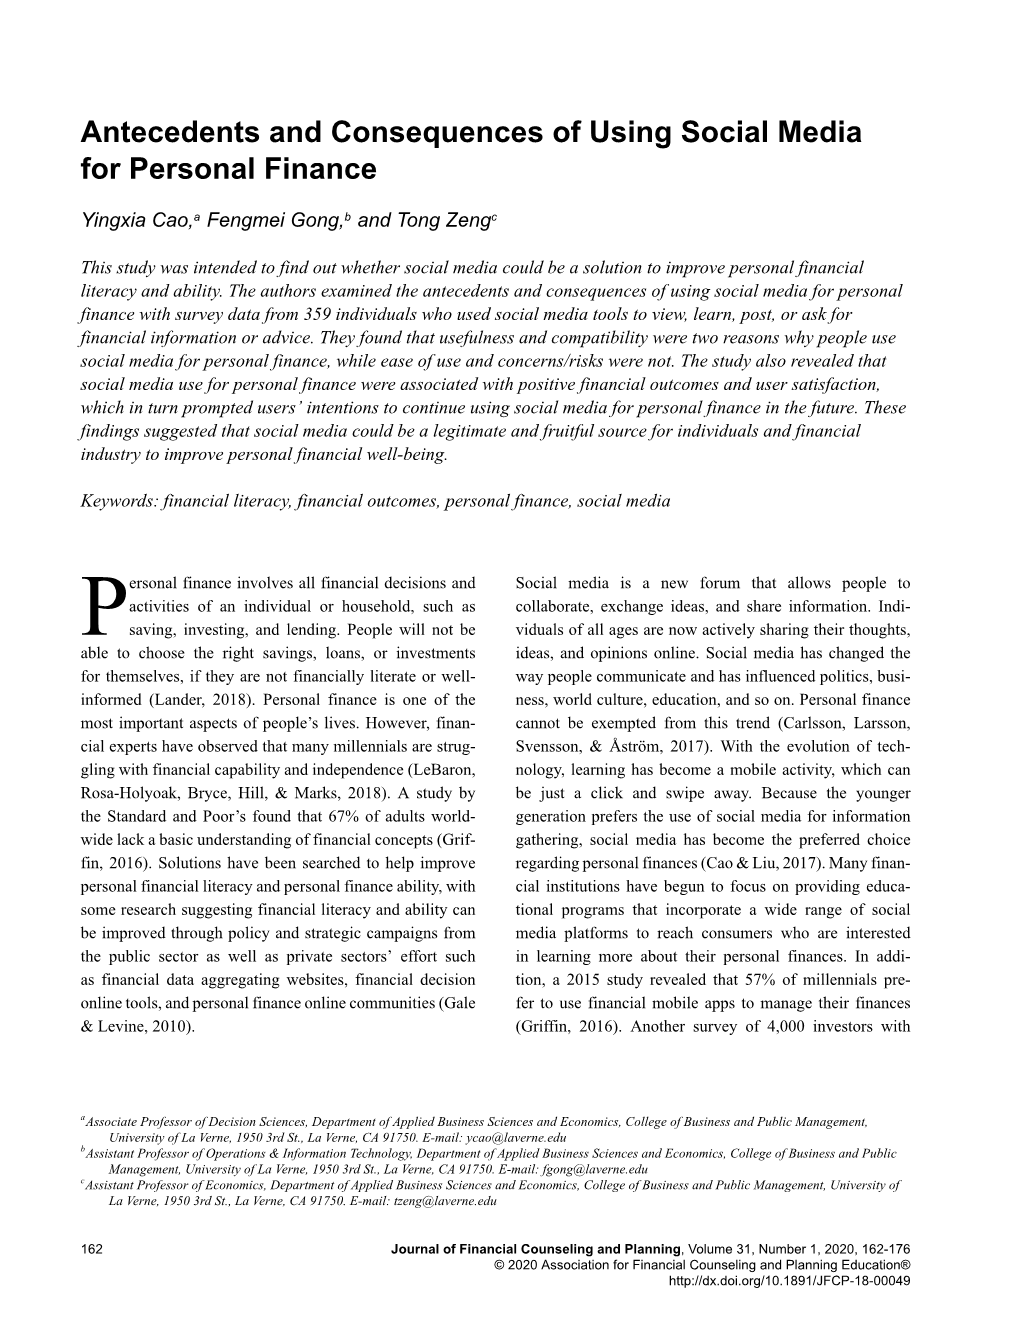 Antecedents and Consequences of Using Social Media for Personal Finance